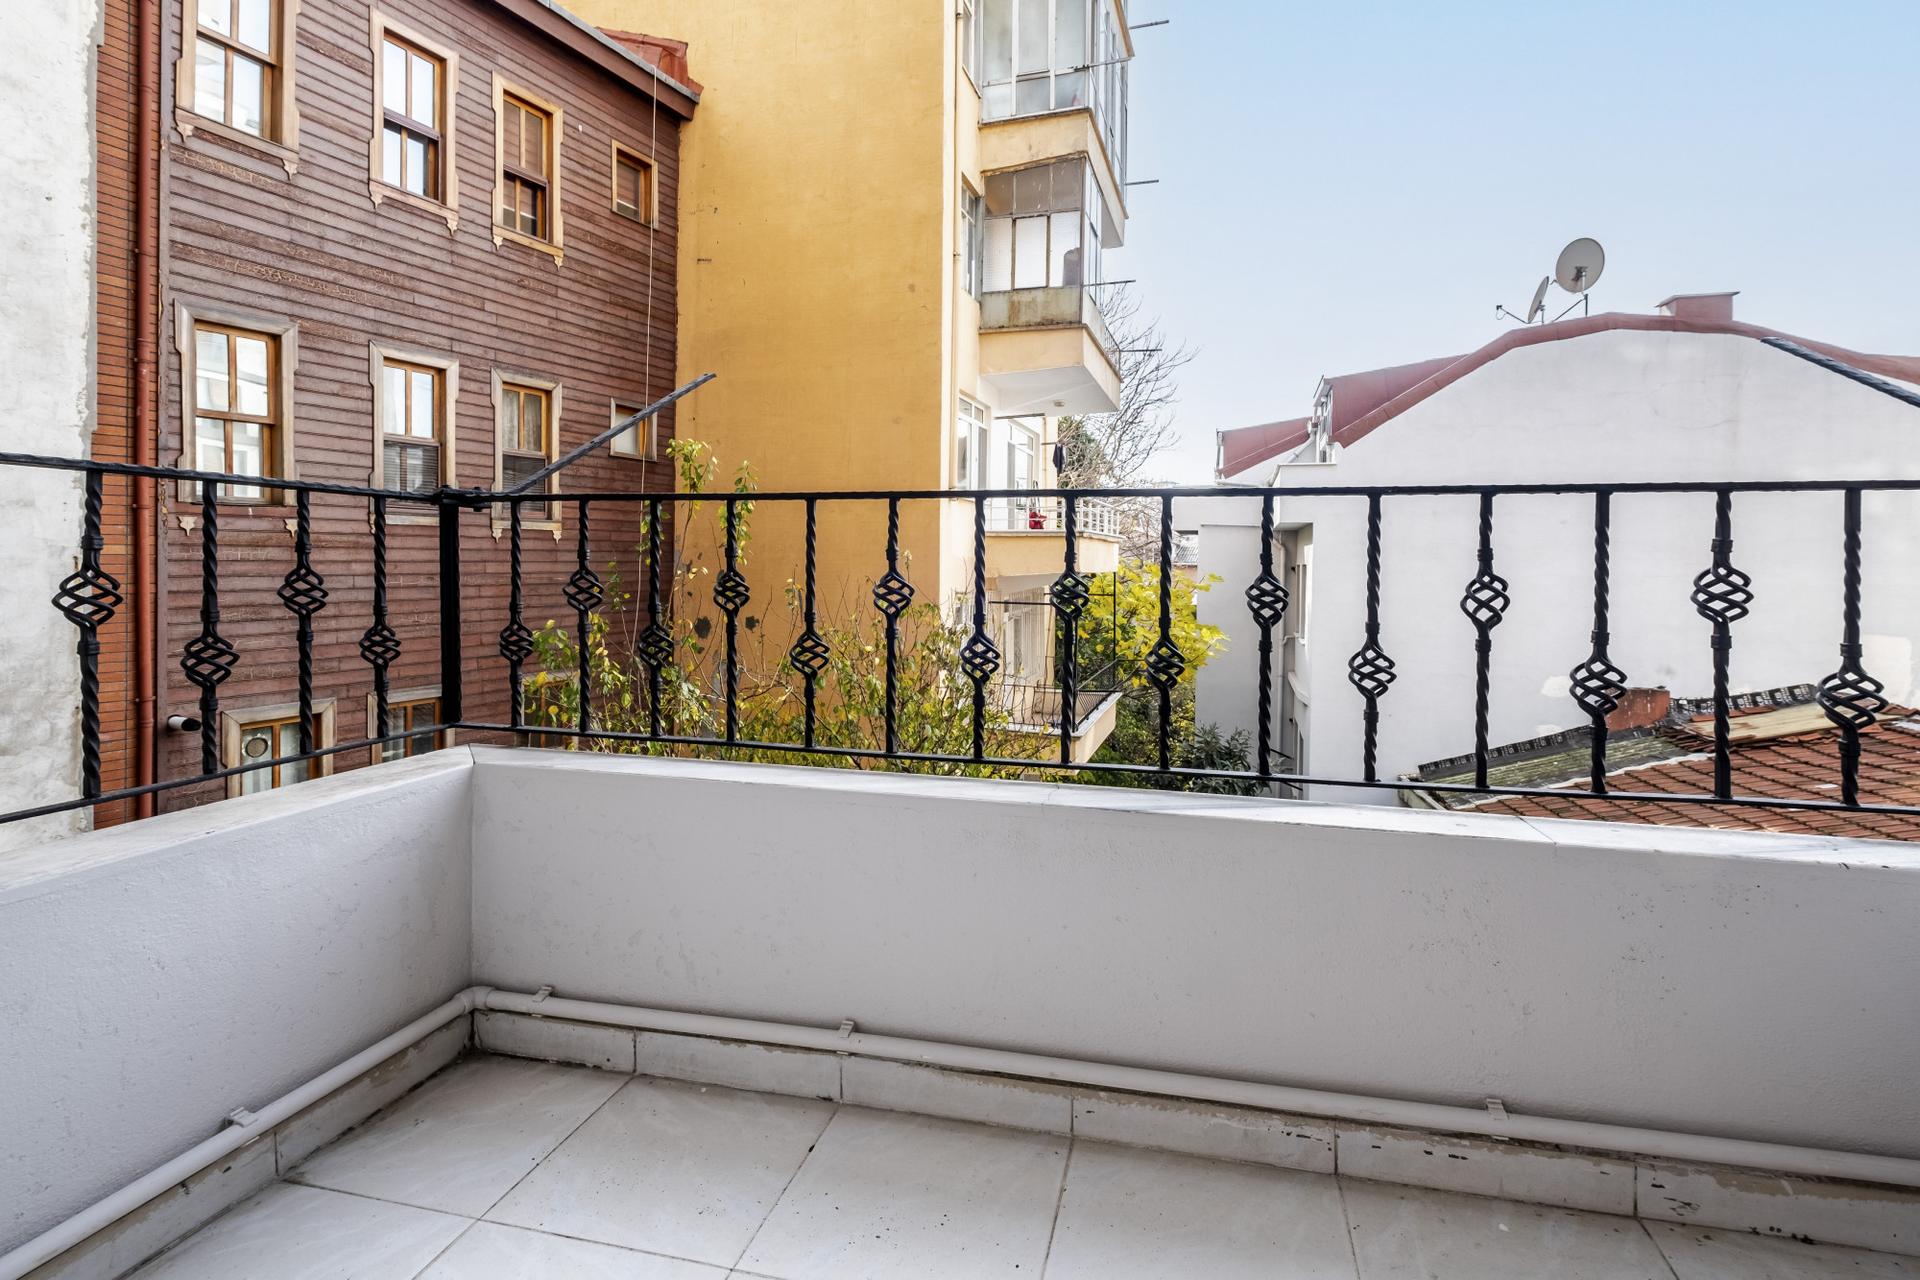 Our cheerful flat is ready to host you during your Besiktas stay.